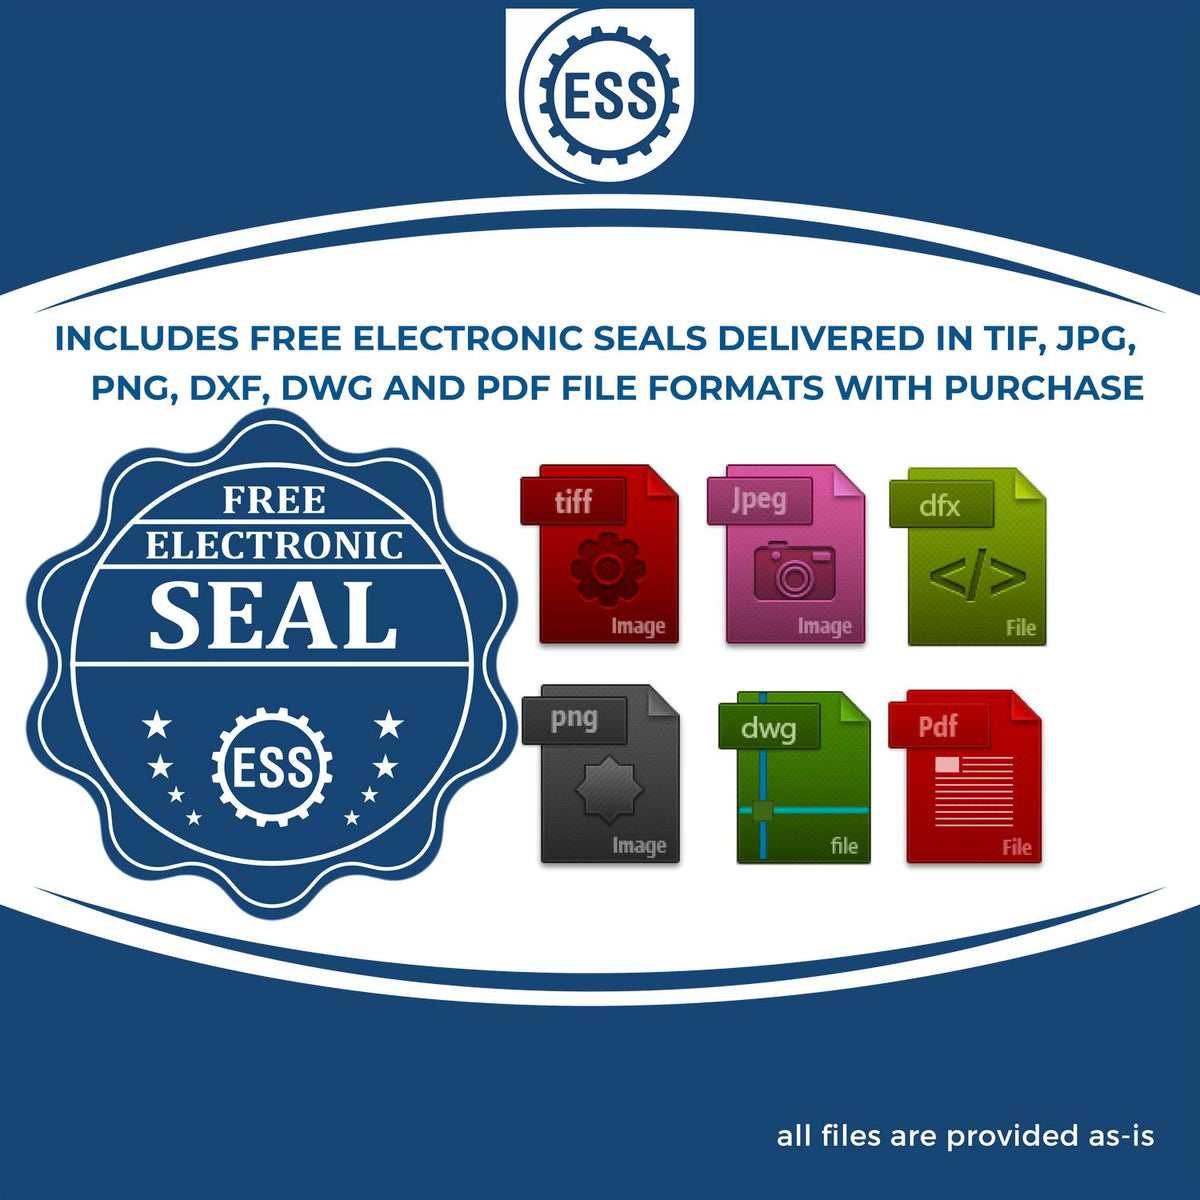 An infographic for the free electronic seal for the Gift Kentucky Land Surveyor Seal illustrating the different file type icons such as DXF, DWG, TIF, JPG and PNG.